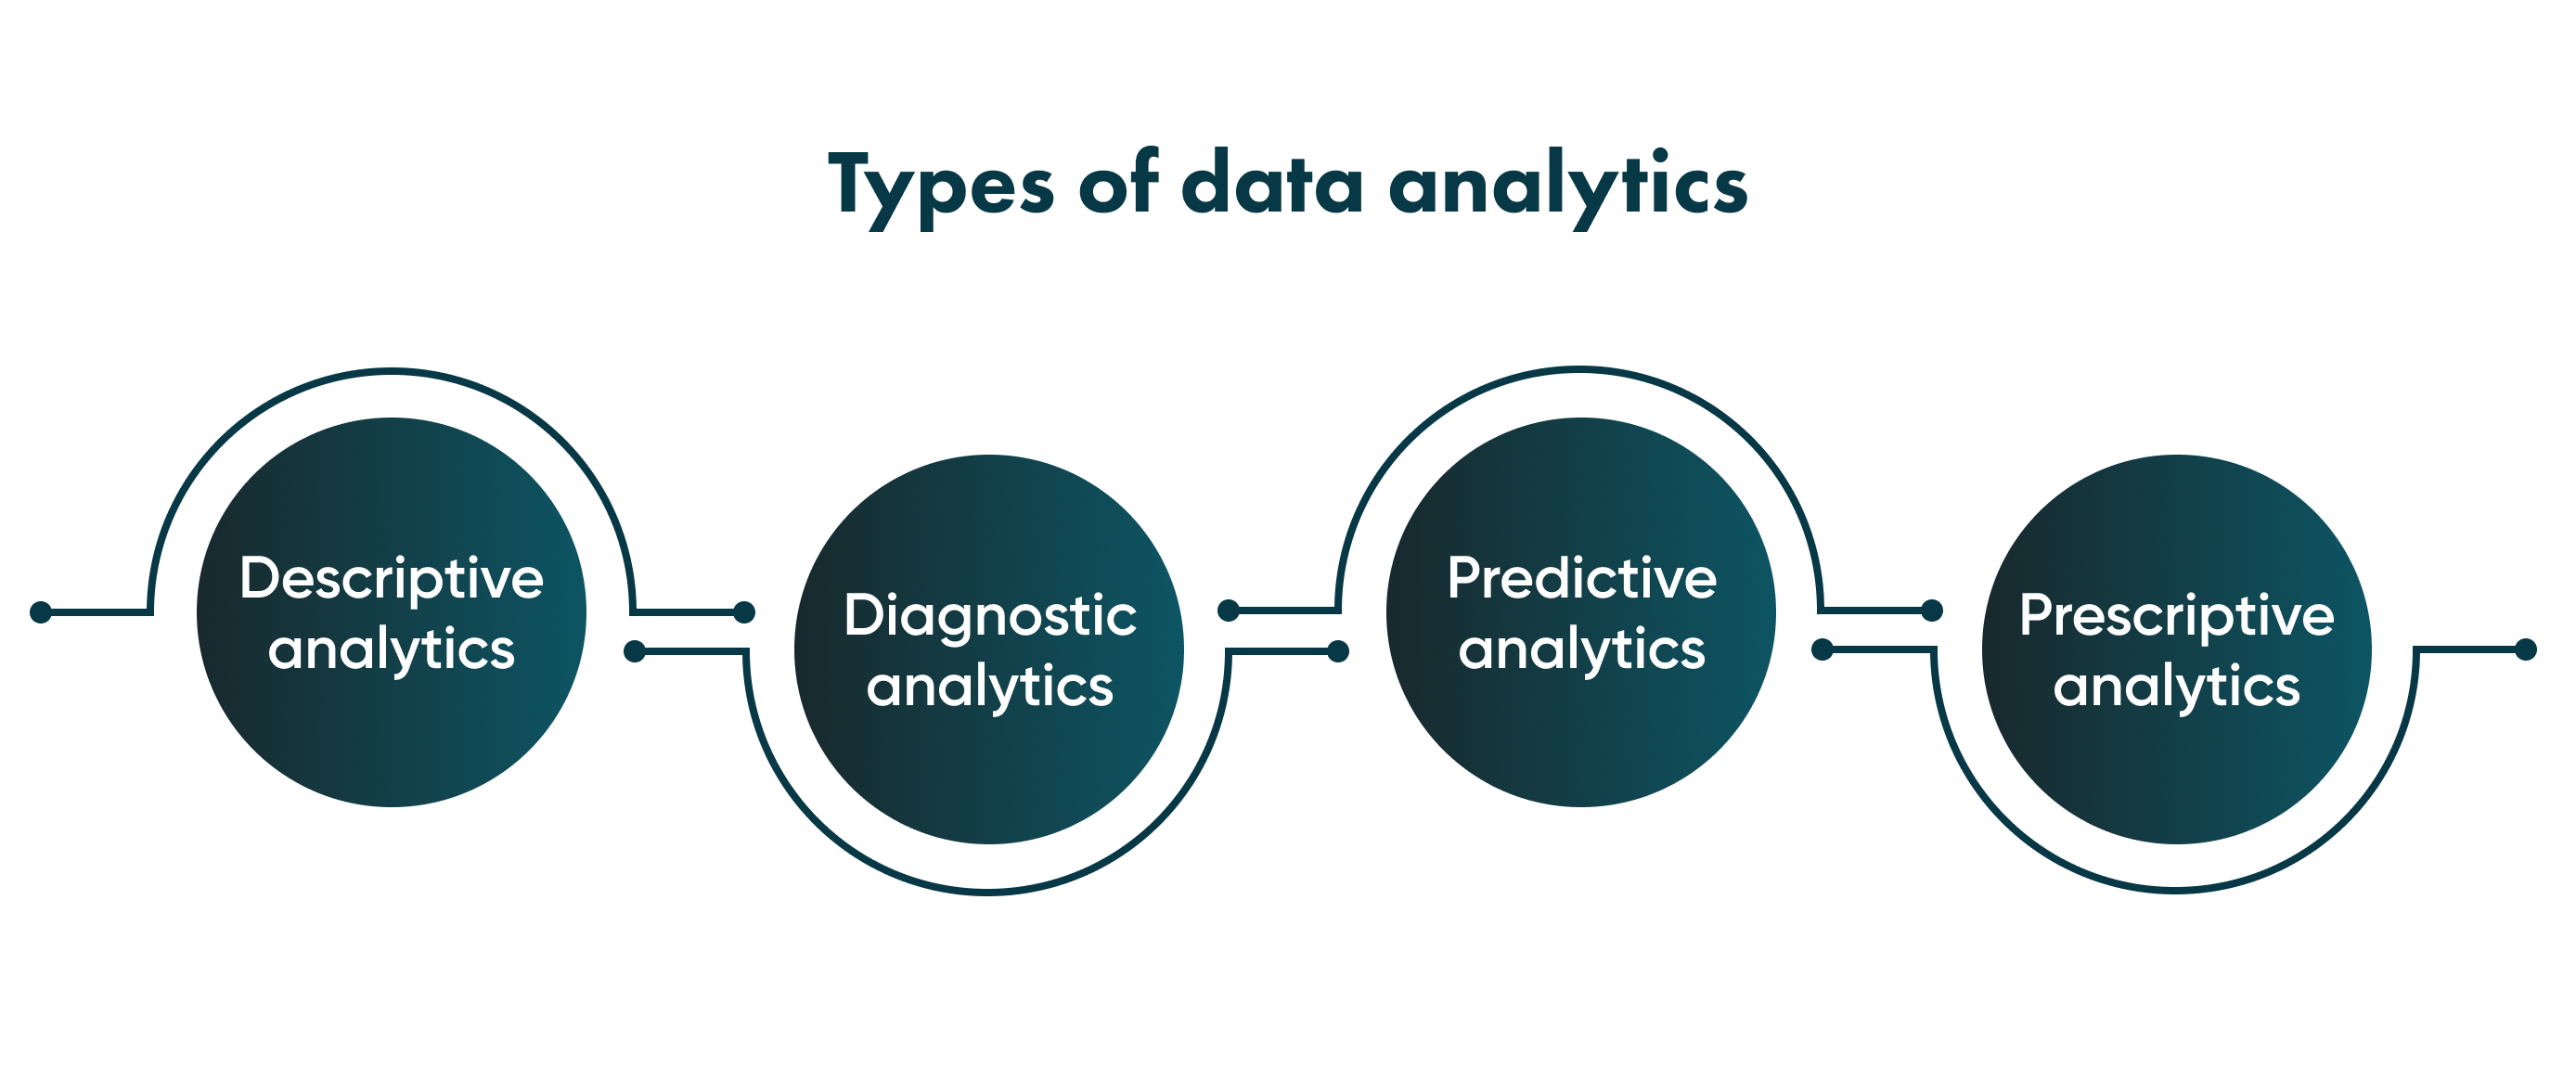 Data analysis in logistics provides a few types of analysis. You need to know them if you want to apply data analytics wisely. 